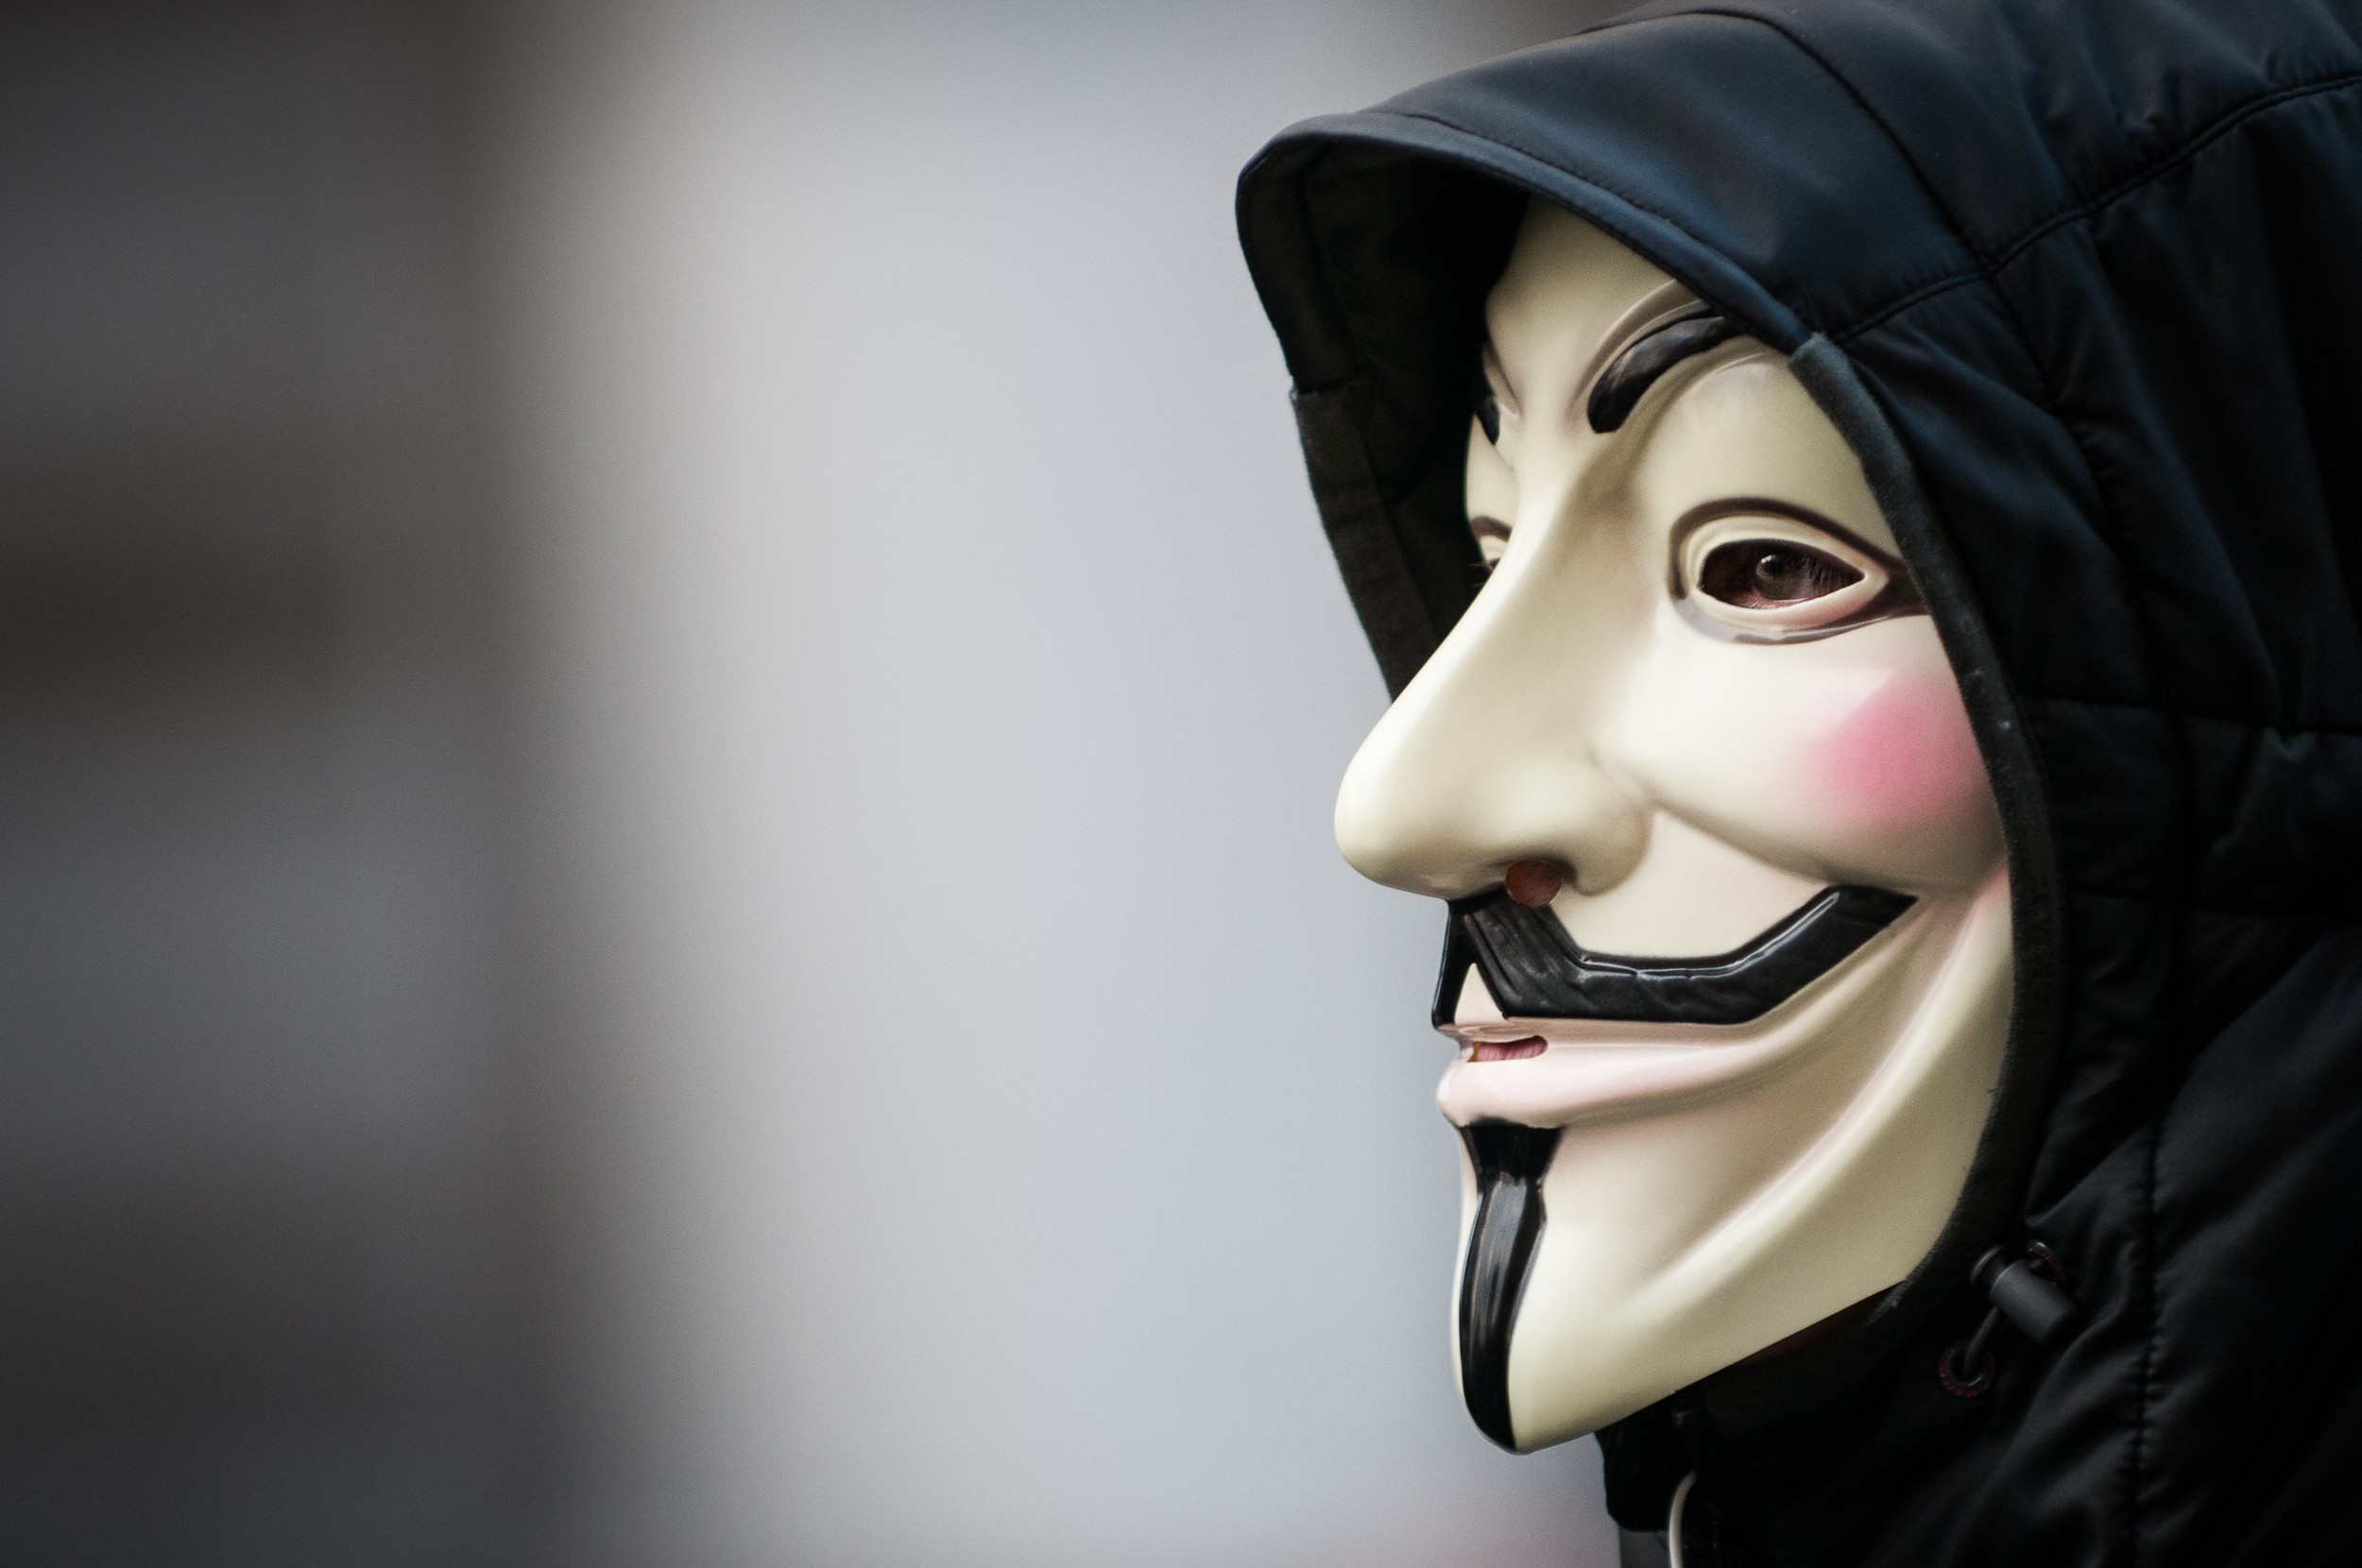 General 2500x1660 Anonymous (hacker group) Guy Fawkes mask mask looking into the distance